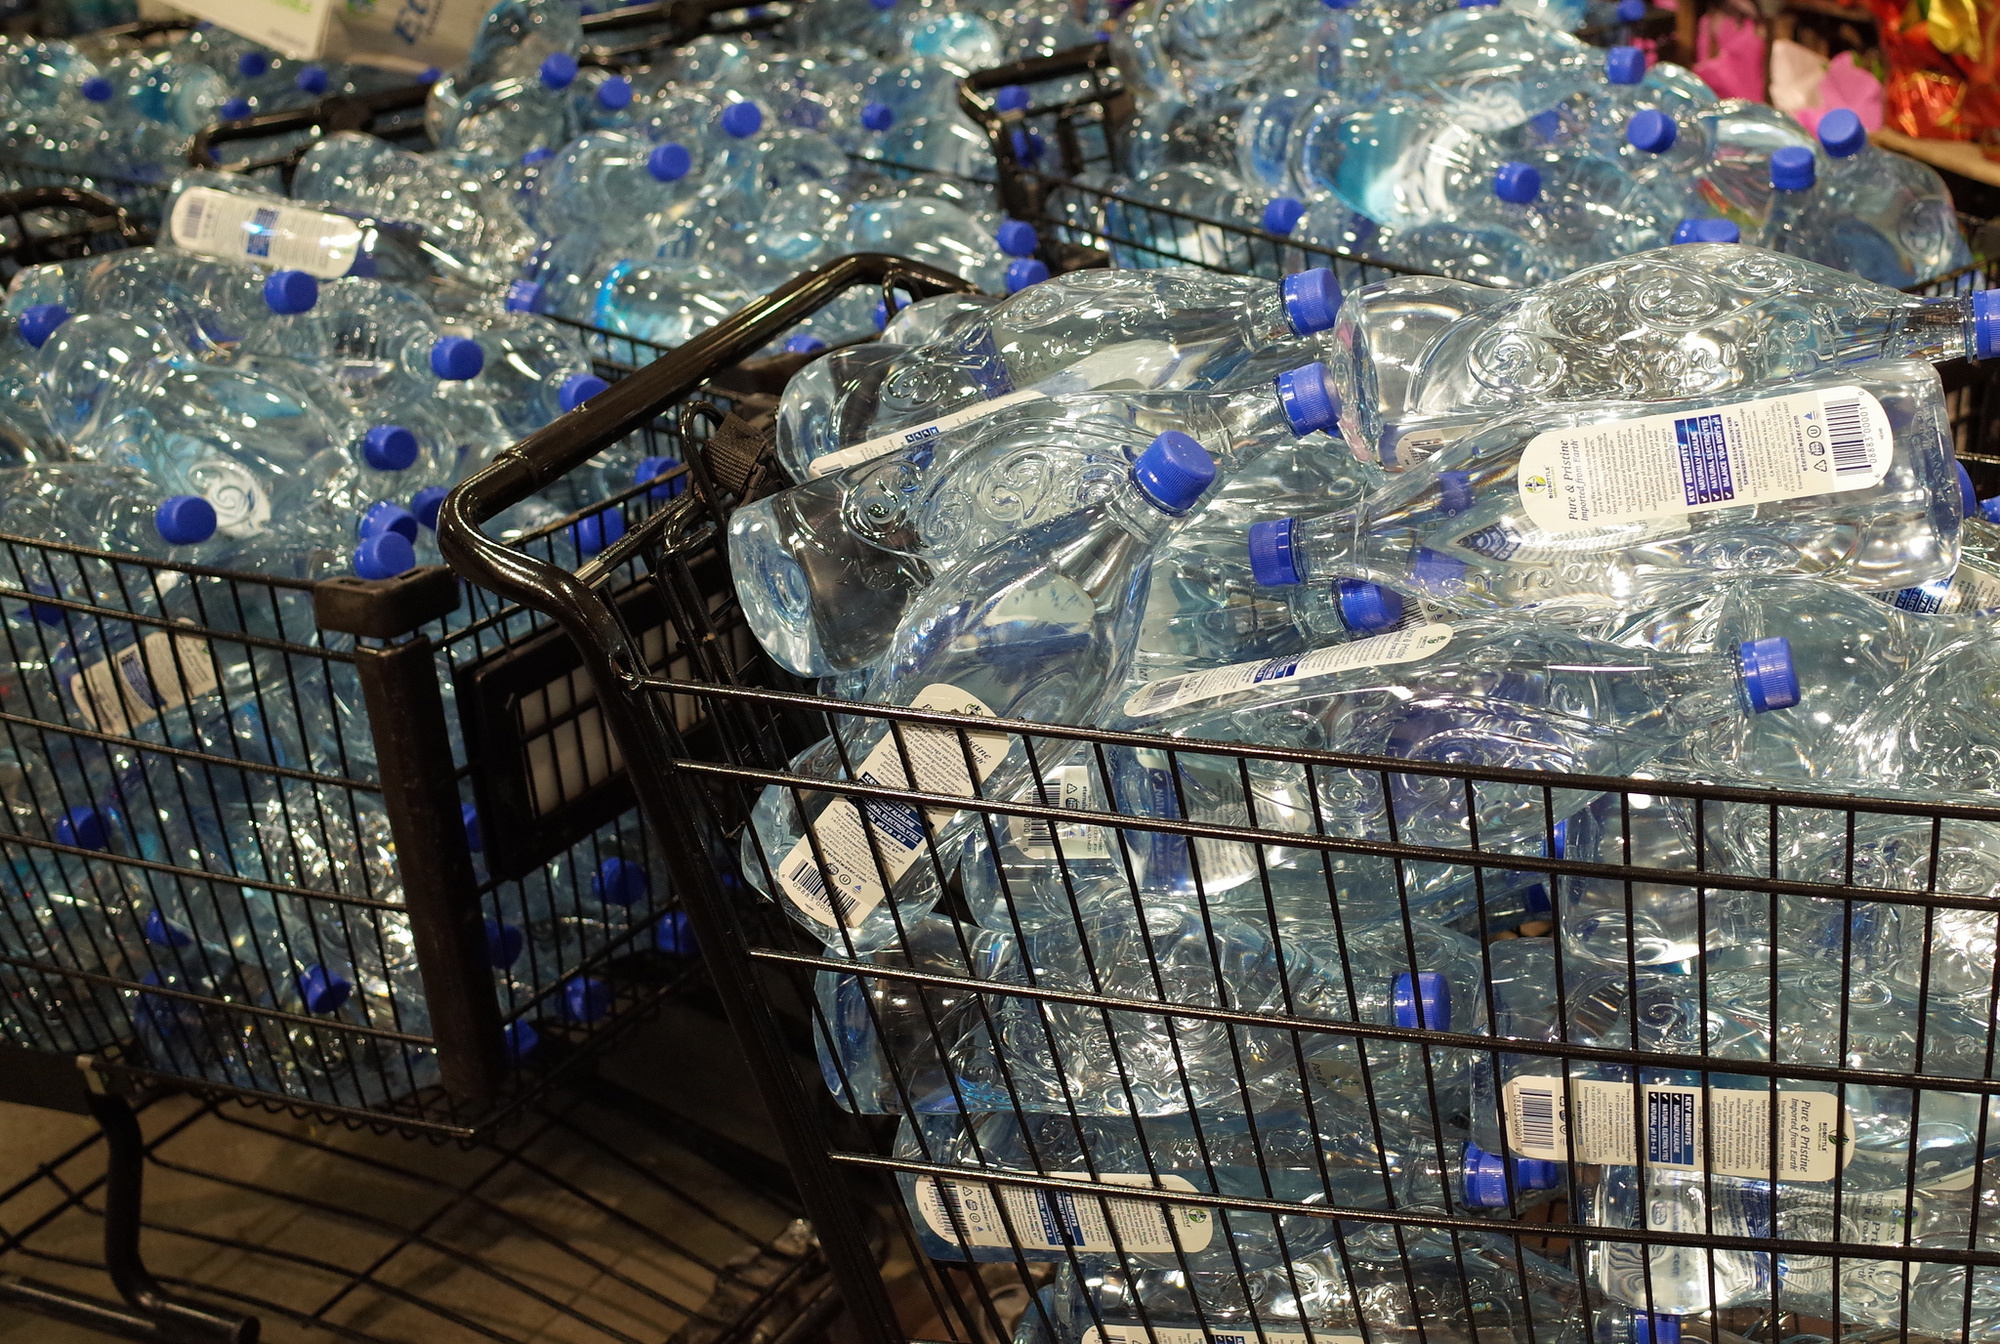 The few drops of water left at the bottom of a plastic bottle when it's thrown away totals up to 22 million gallons a year. That's only in the U.S.